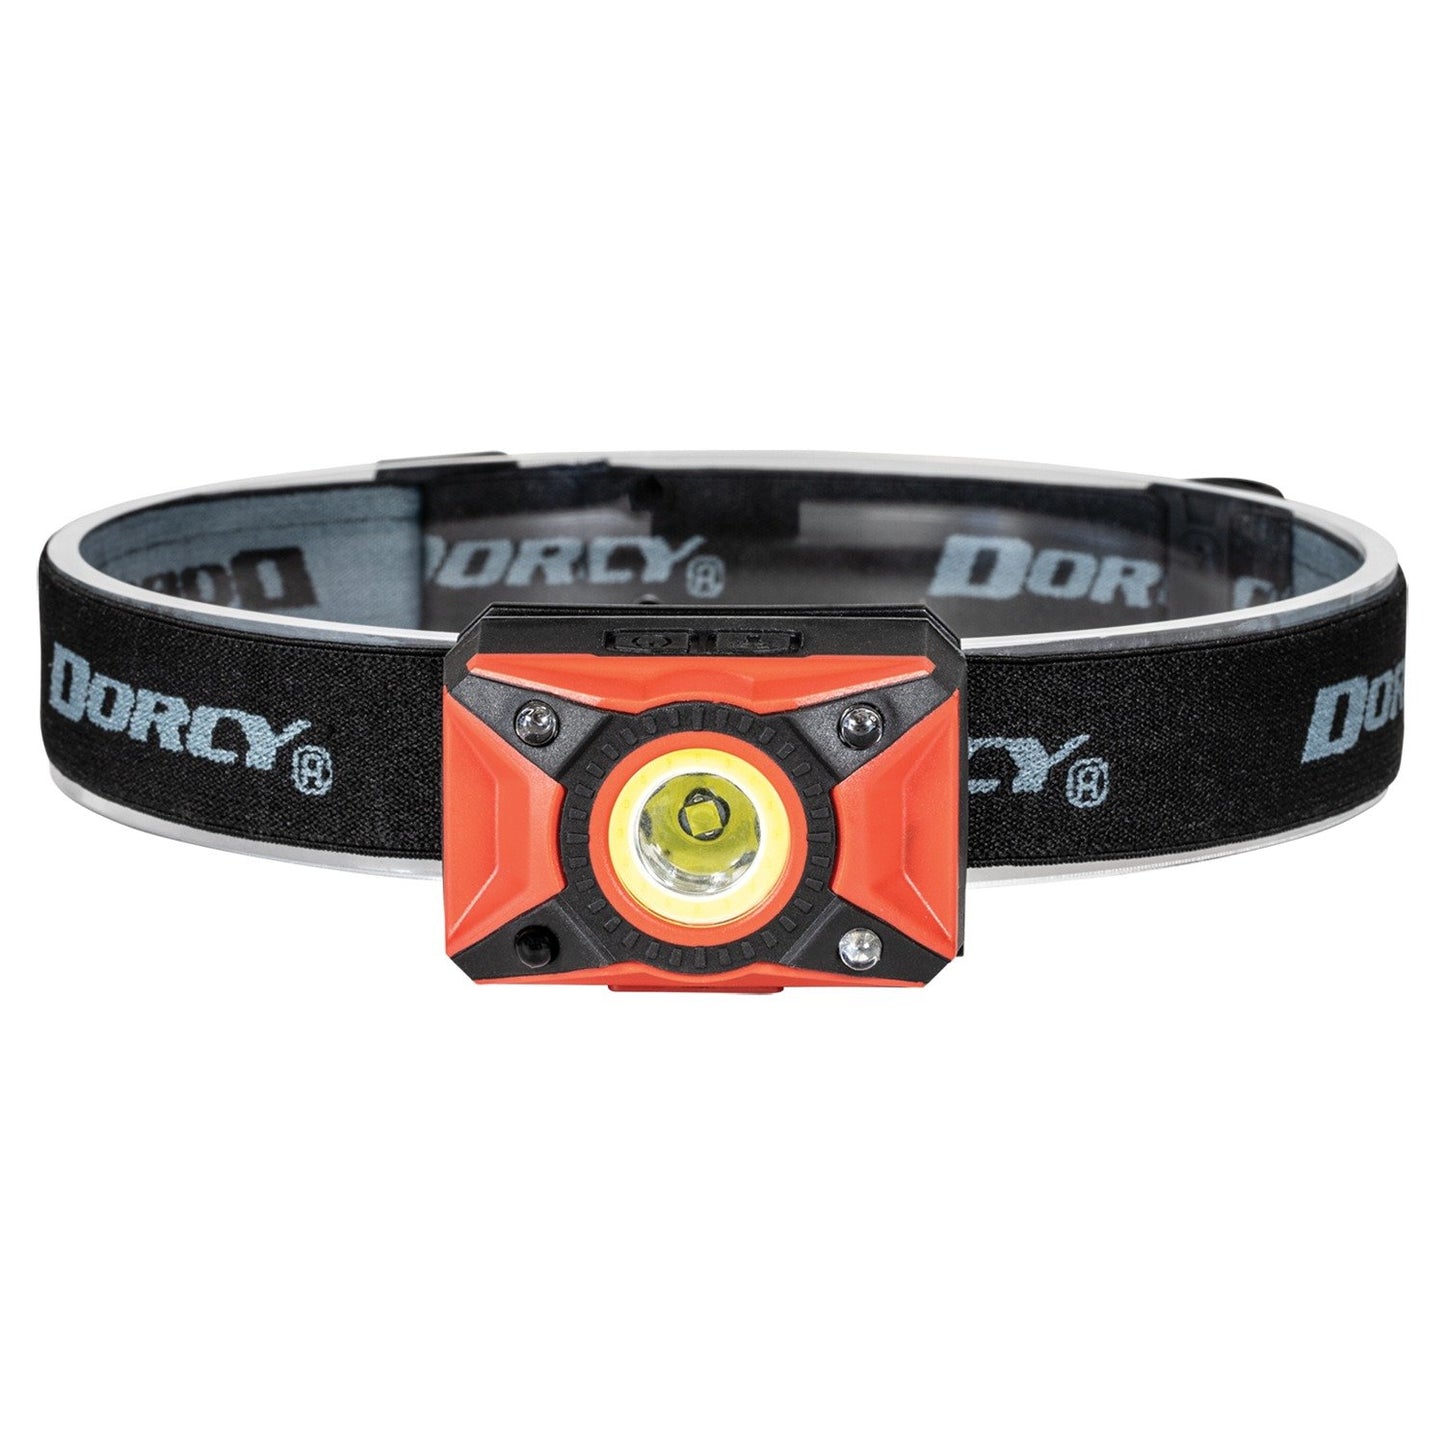 Dorcy 41-4337 650-Lumens LED USB Rechargeable Motion-Activated Headlamp